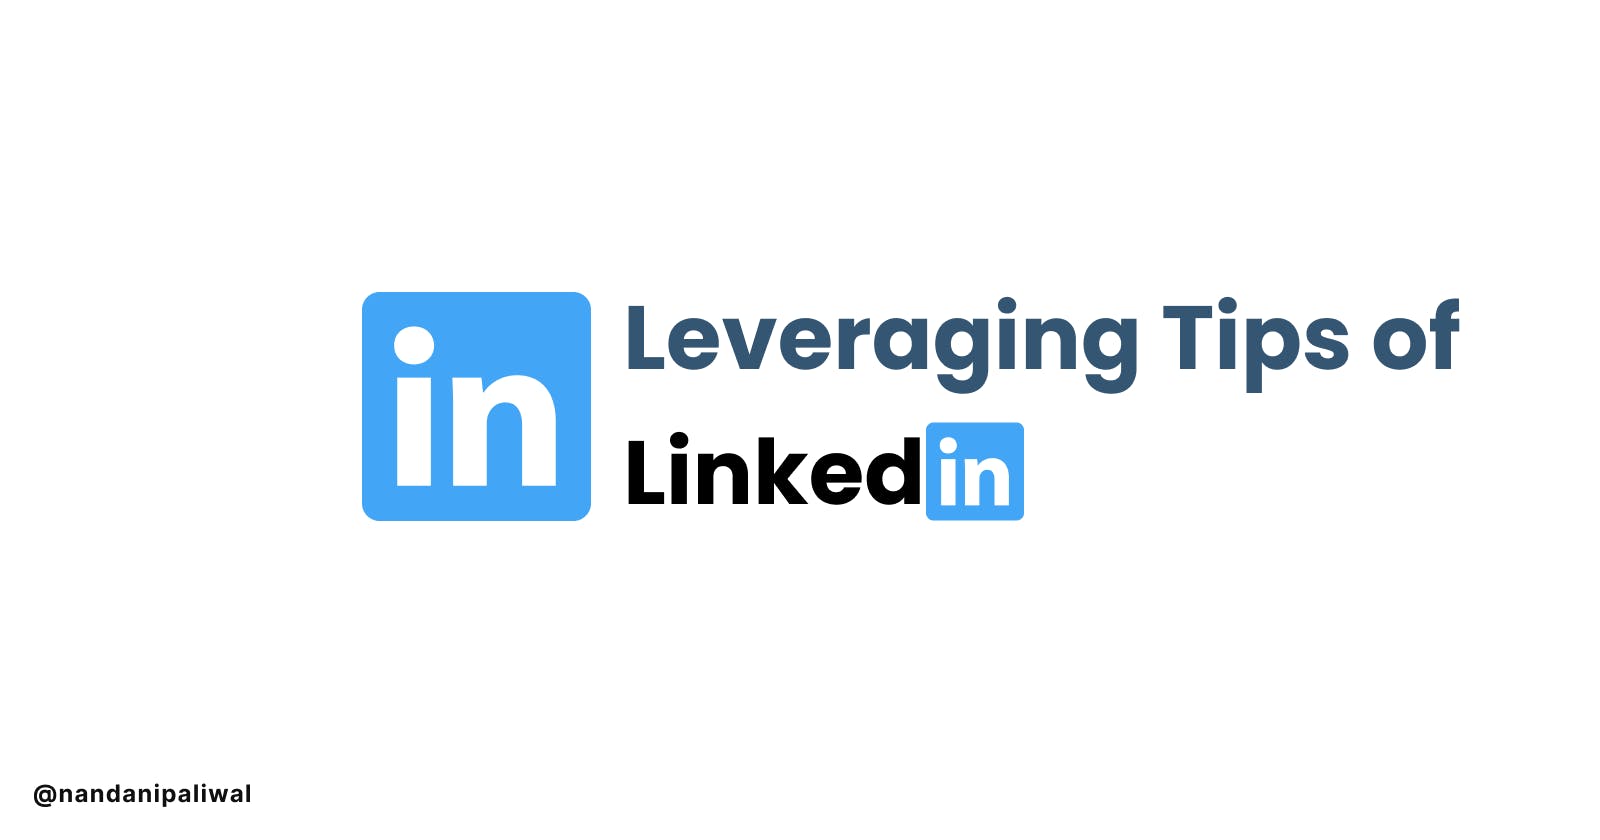 Some tips to leverage LinkedIn 😉